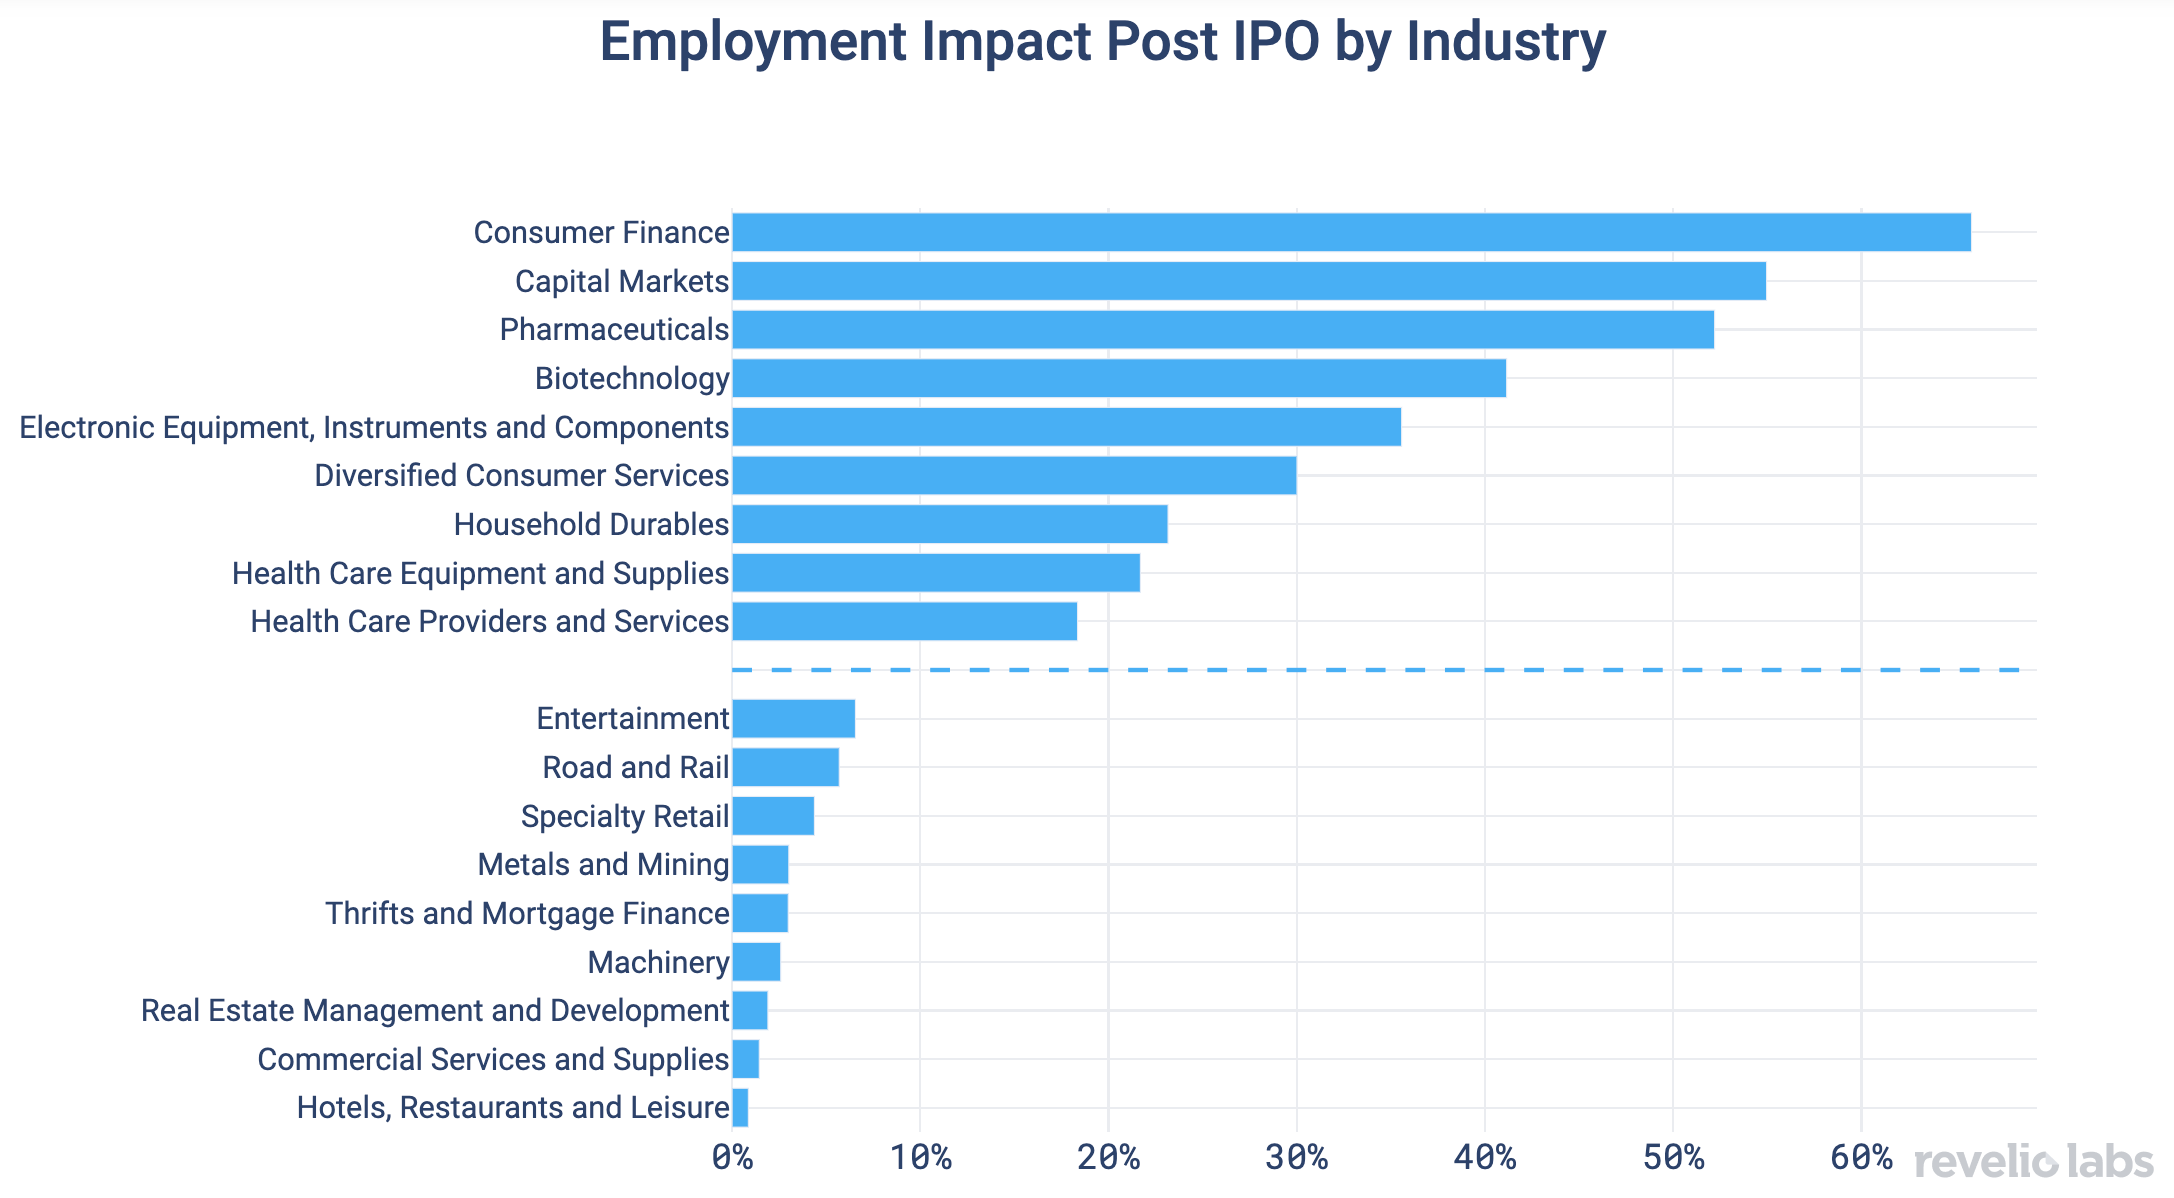 Industry employment increase